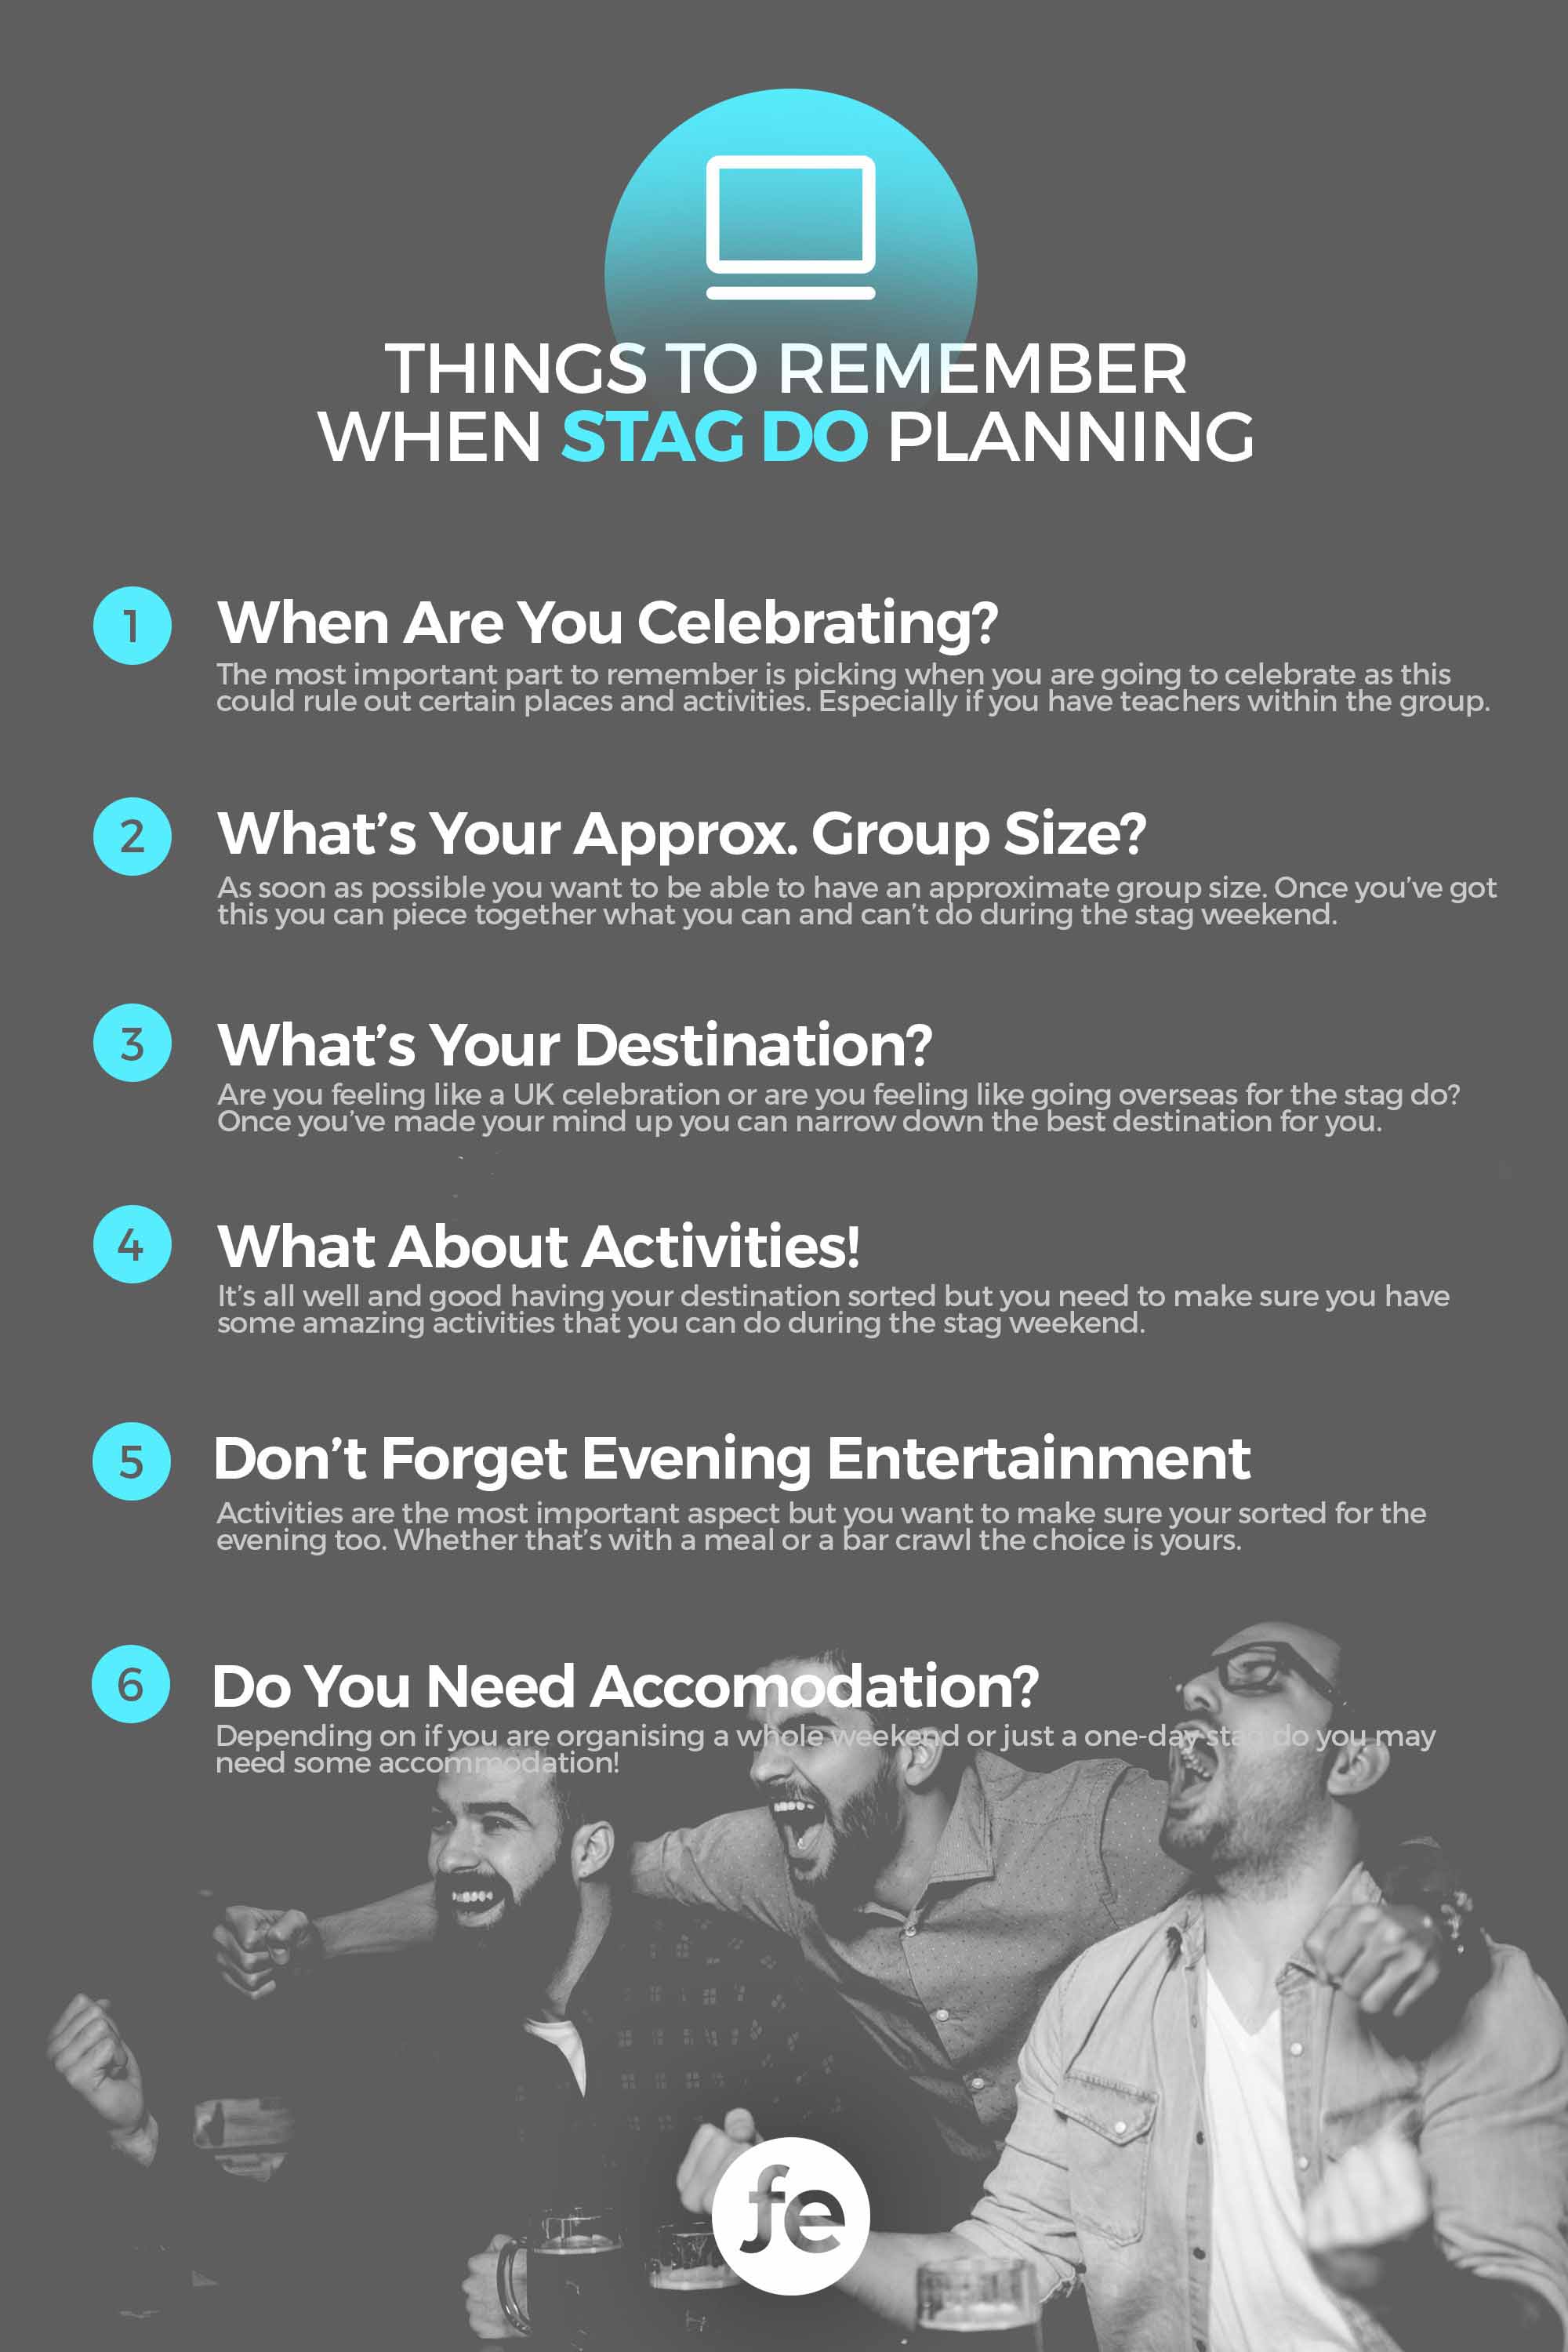 Things to Remember When Stag Do Planning